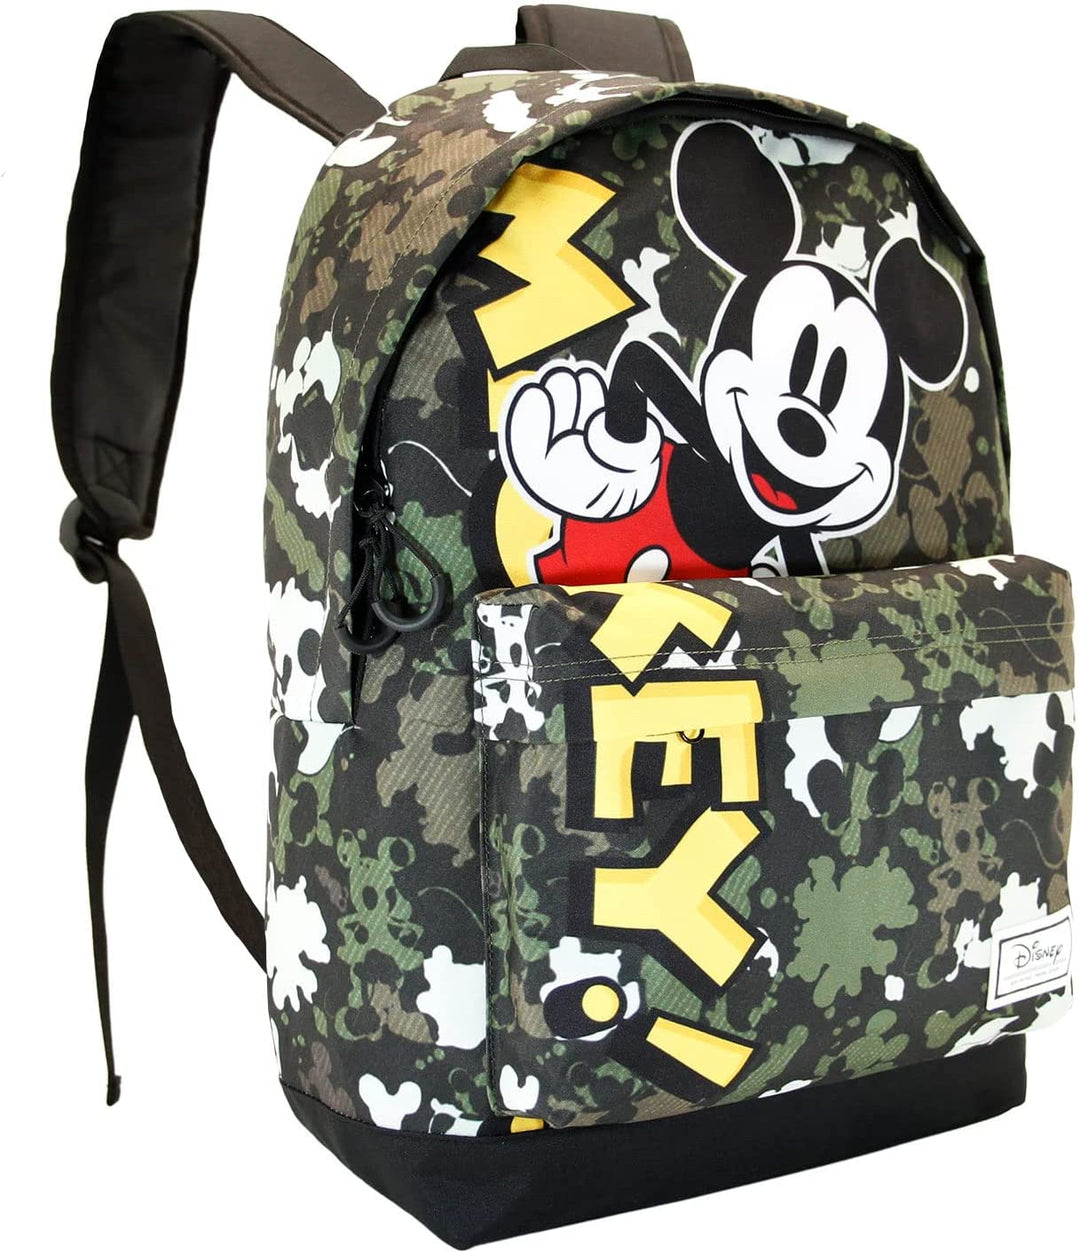 Mickey Mouse Surprise-Fan HS Backpack, Military Green